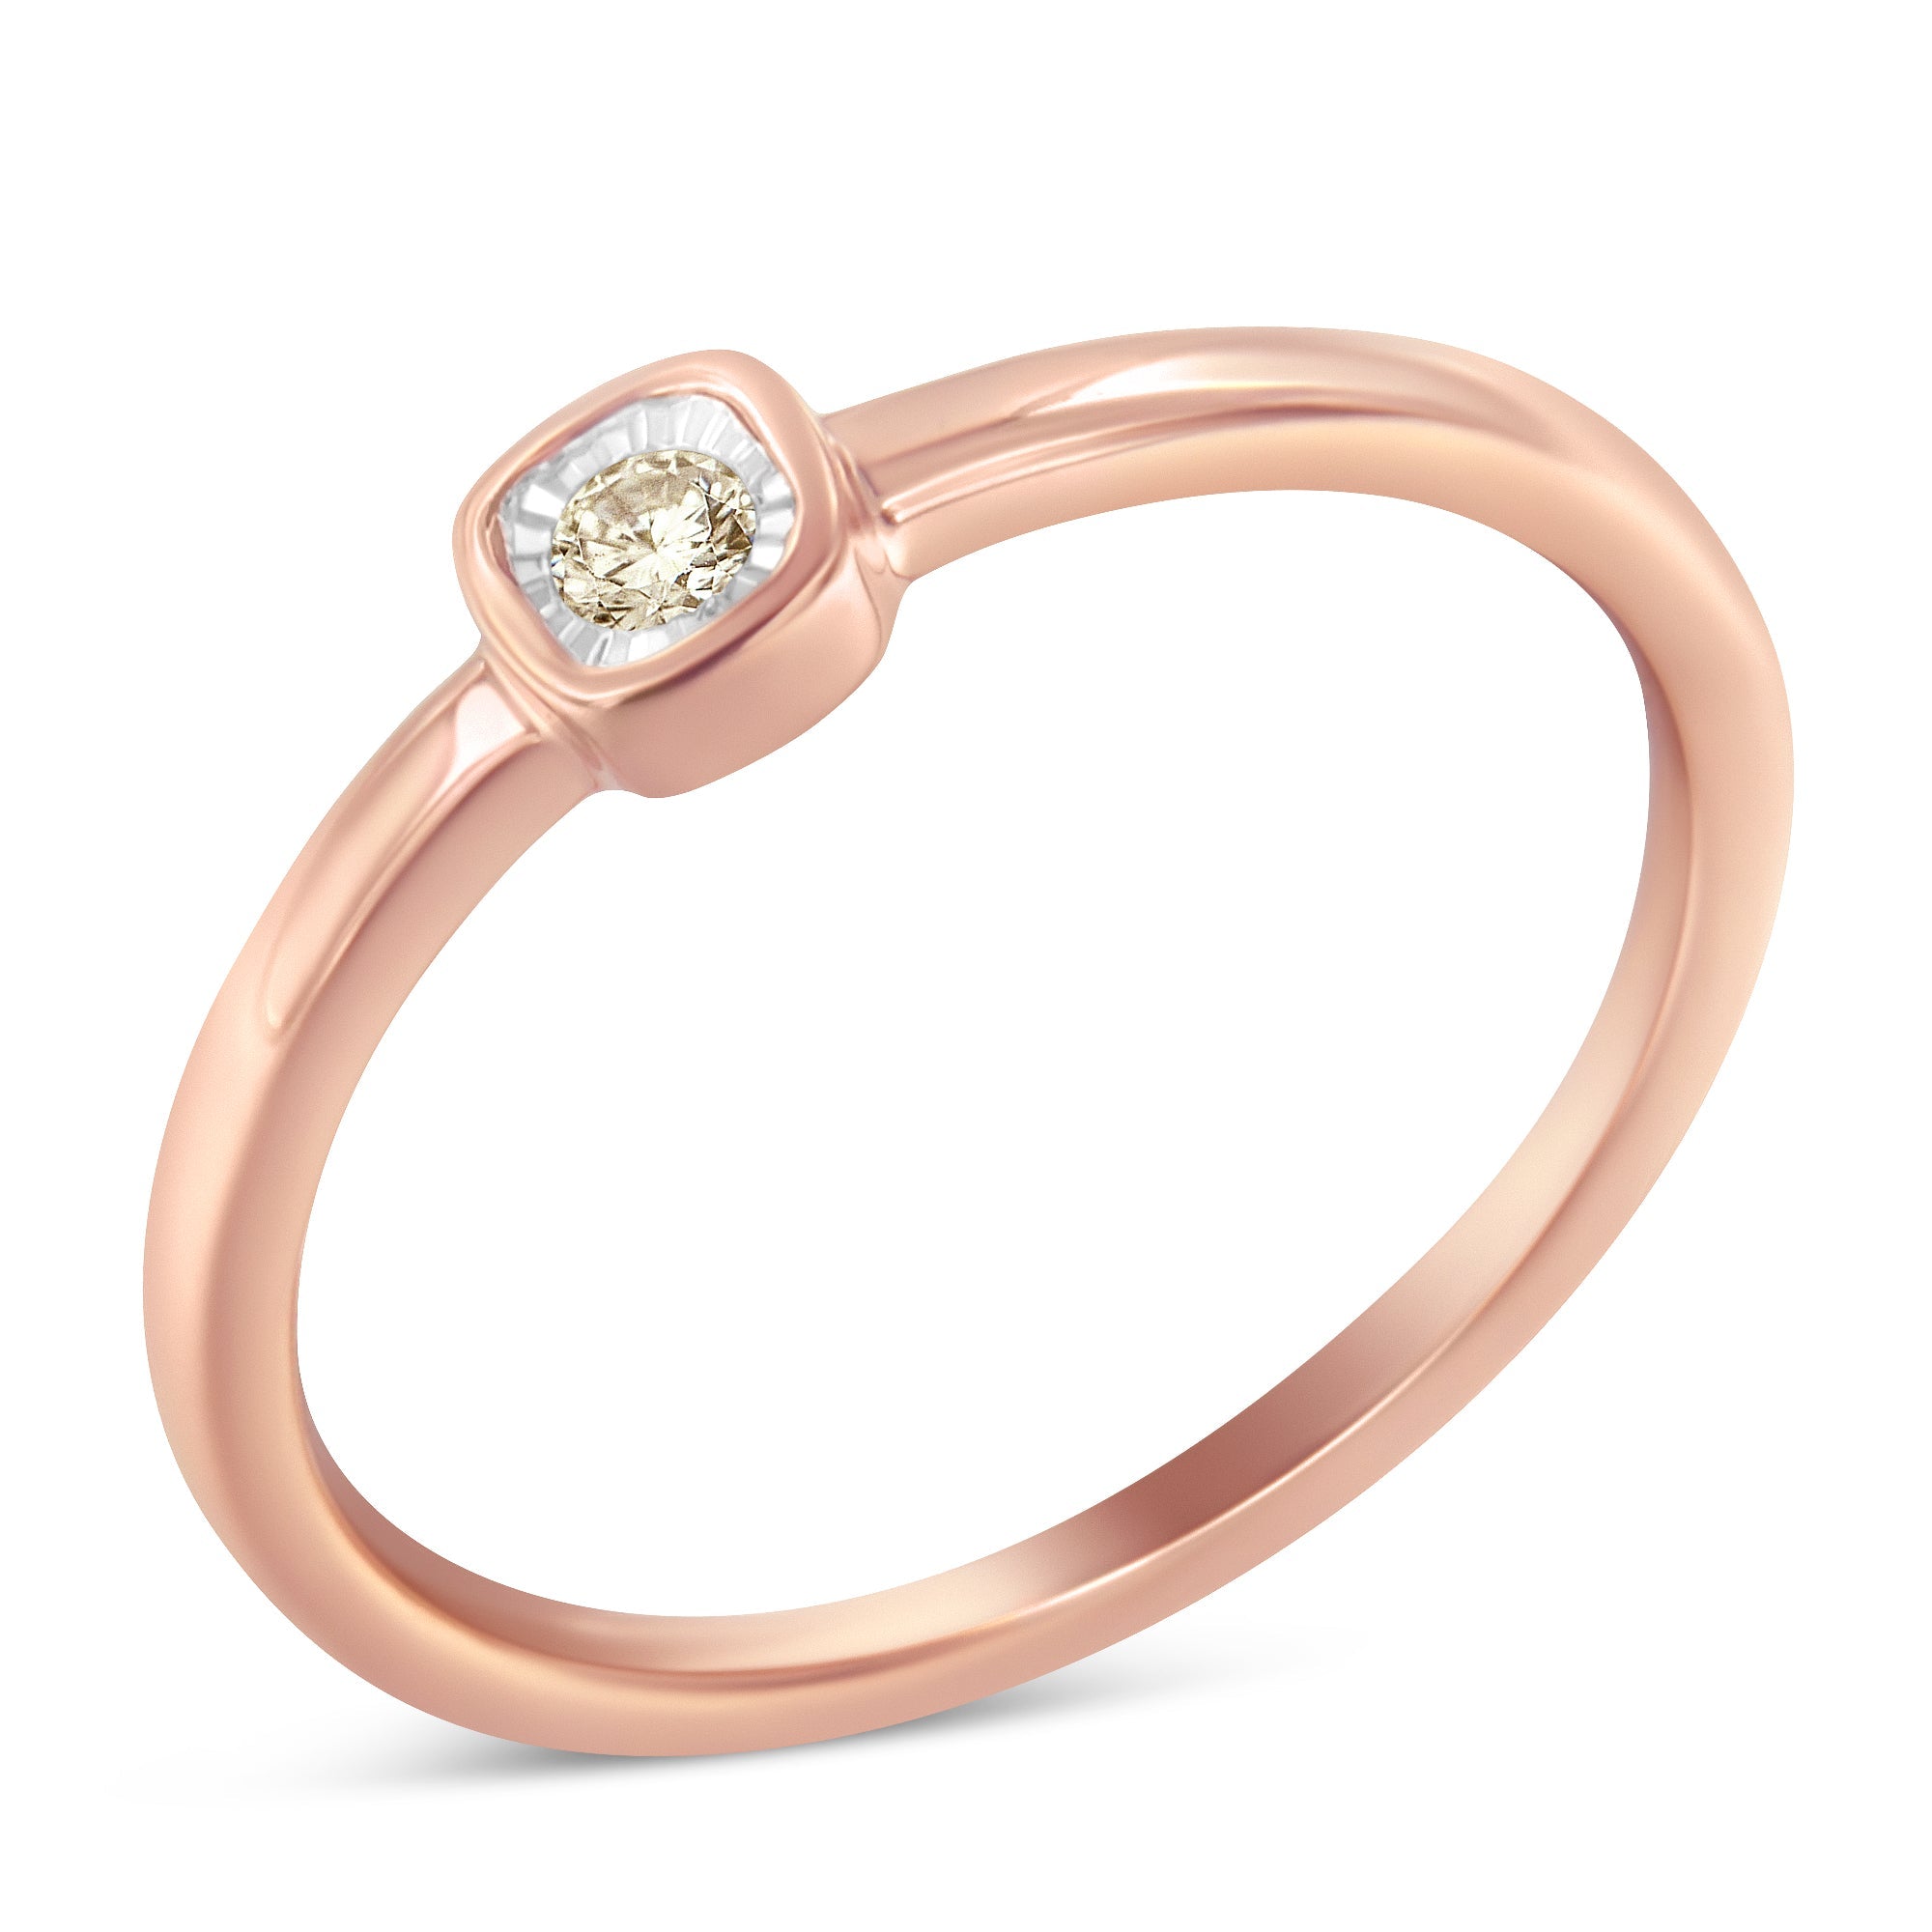 14K-Rose-Gold-Plated-.925-Sterling-Silver-1/20-Carat-Diamond-Square-Cushion-Shaped-Miracle-Set-Petite-Fashion-Promise-Ring-(J-K-Color,-I1-I2-Clarity)-Size-6-Rings